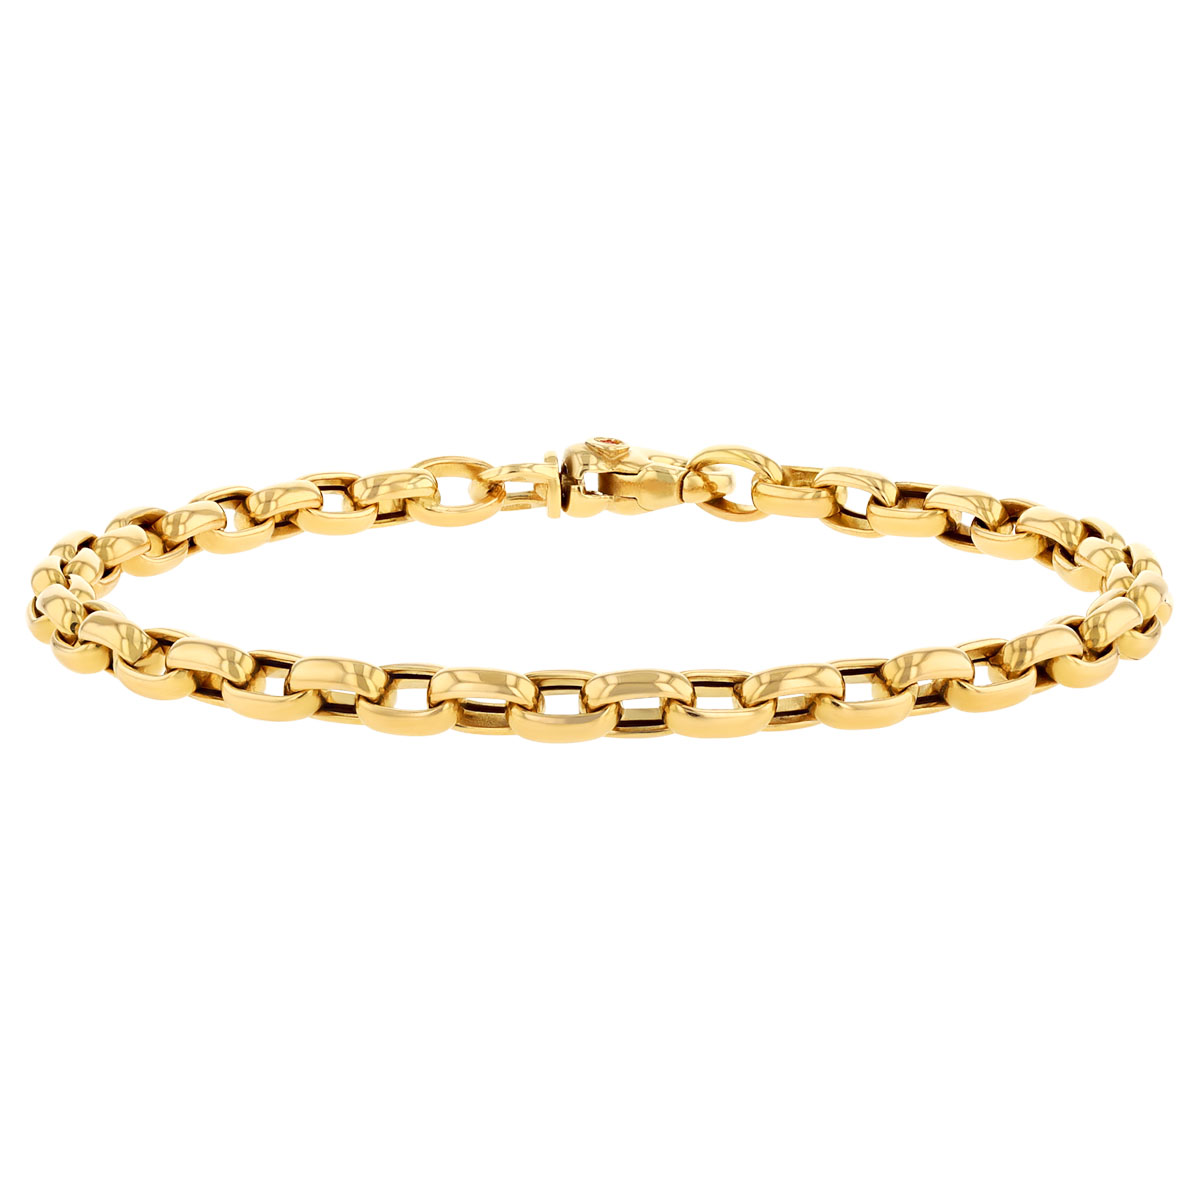 Roberto Coin Yellow Gold Rounded Link Chain Bracelet, 7